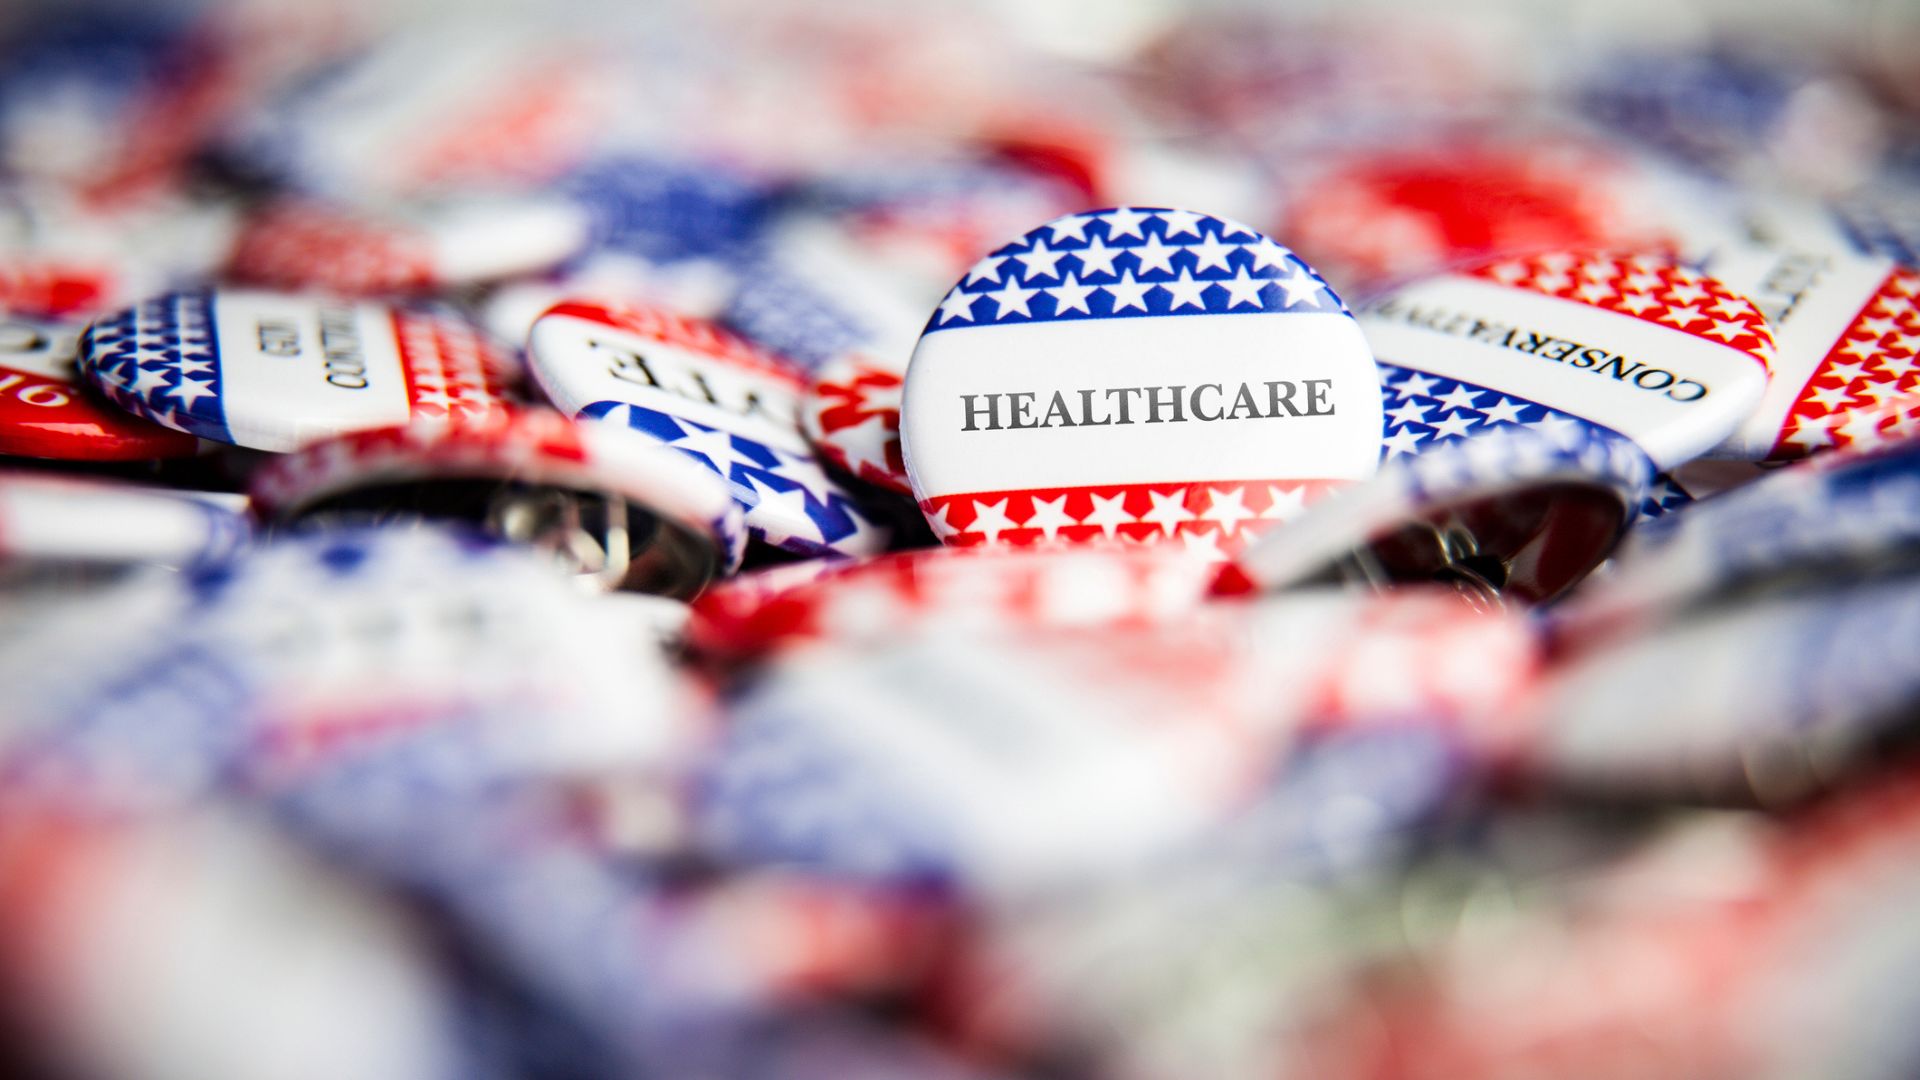 Election vote buttons that say healthcare